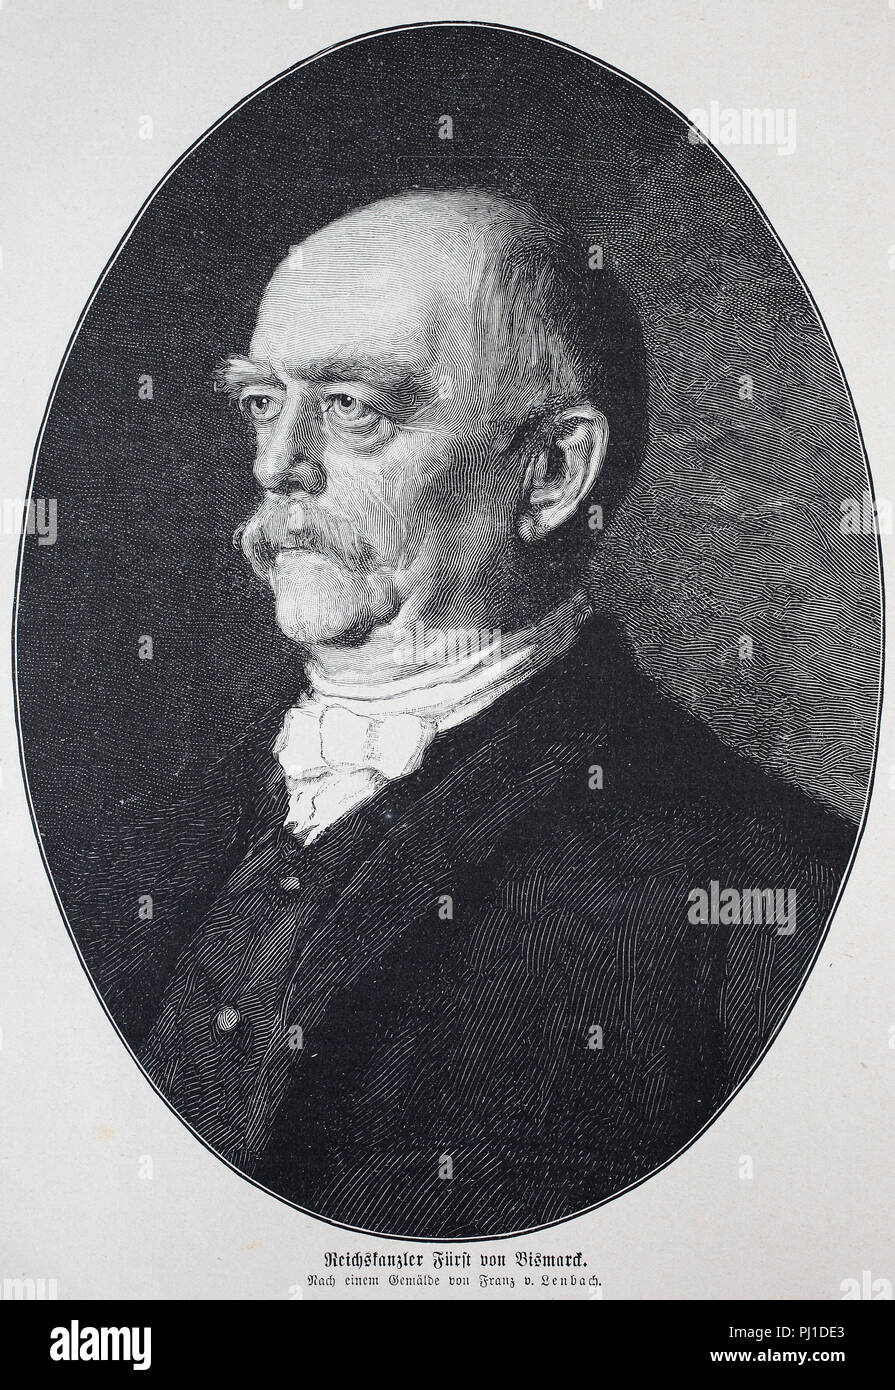 Otto Eduard Leopold, Prince of Bismarck, Born Otto Eduard Leopold von Bismarck-Schönhausen, 1 April 1815 – 30 July 1898, Otto von Bismarck, first Chancellor of the German Empire between 1871 and 1890, digital improved reproduction of an woodprint from the year 1890 Stock Photo